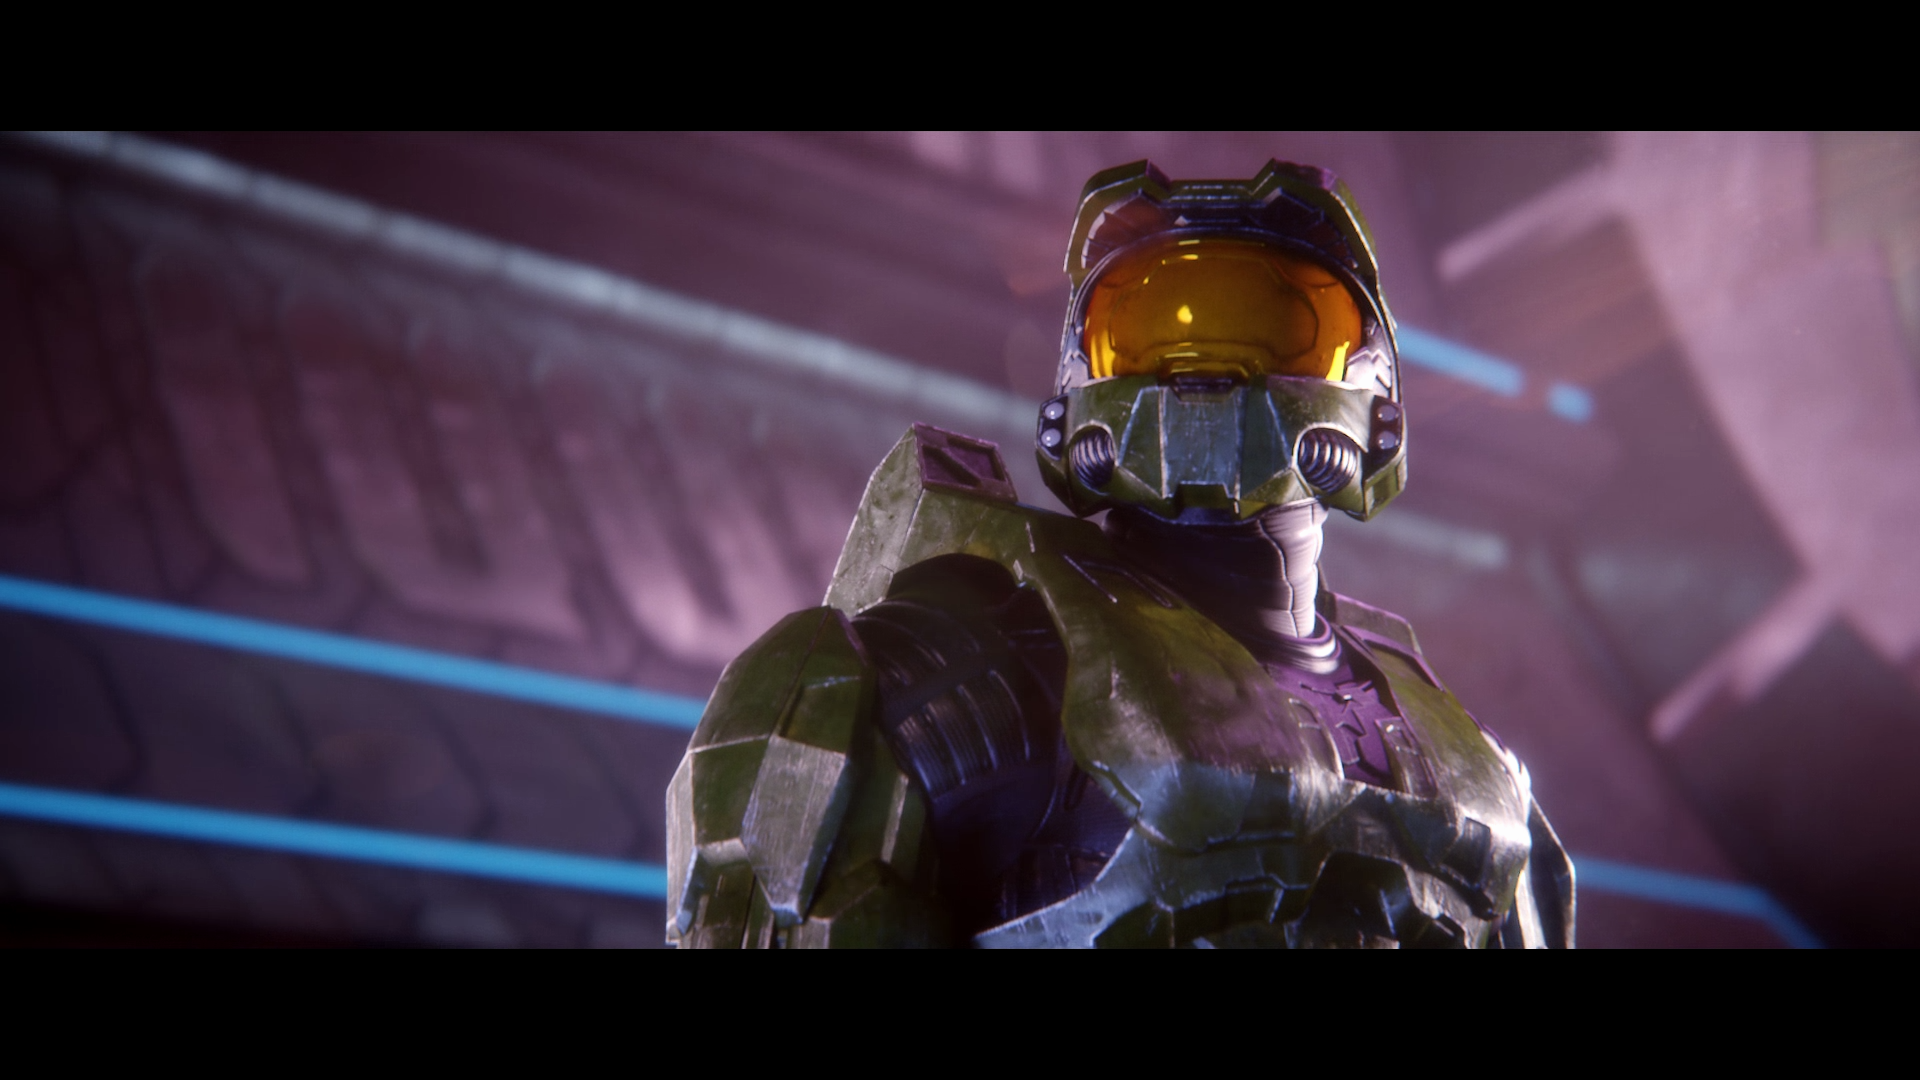 Halo 2 Master Chief Halo Video Game Characters Helmet Video Game Man Video Games 1920x1080